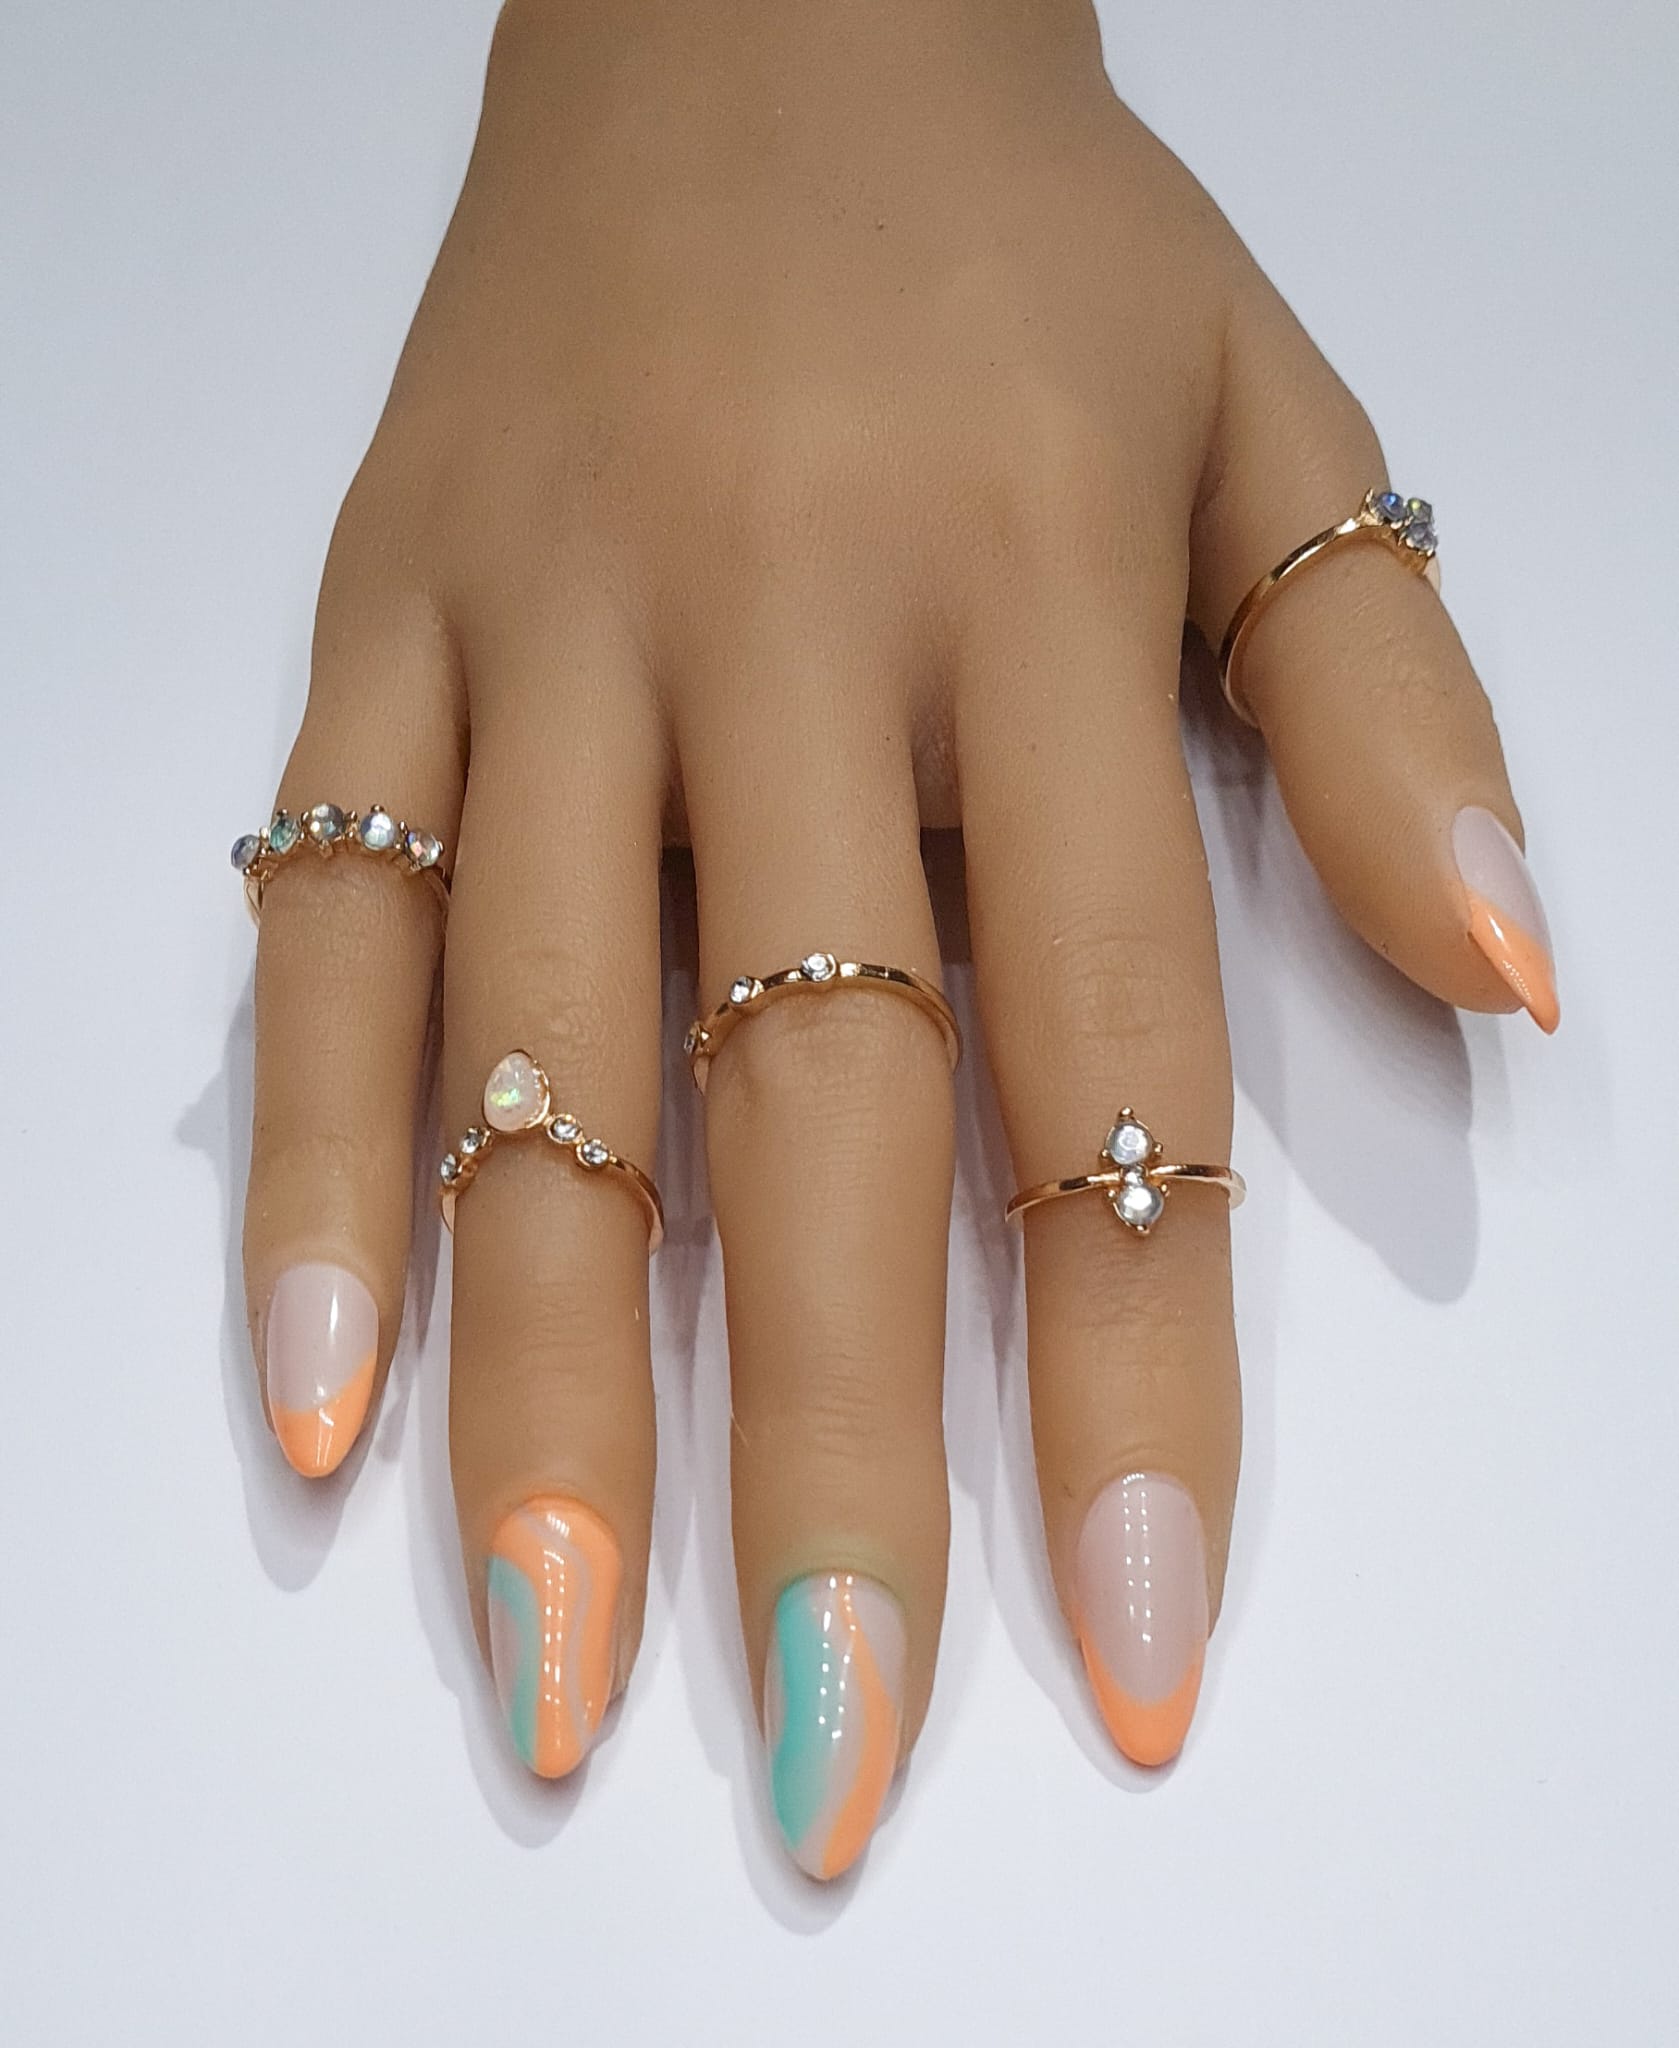 Clip on Nails -  UK